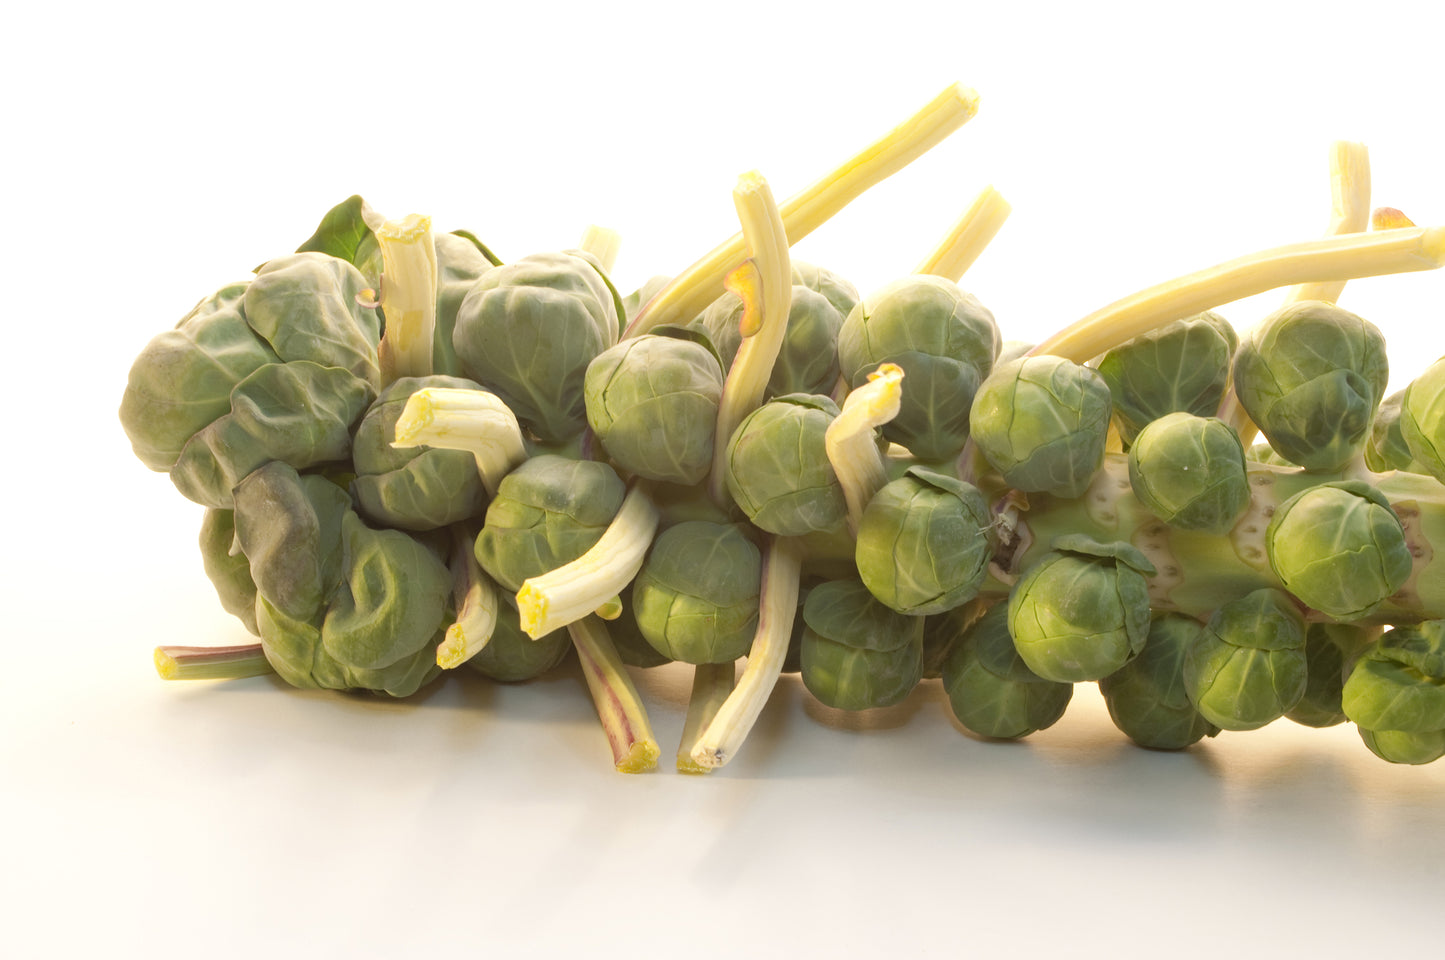 Brussels Sprout Maximus F1 Hybrid Seeds